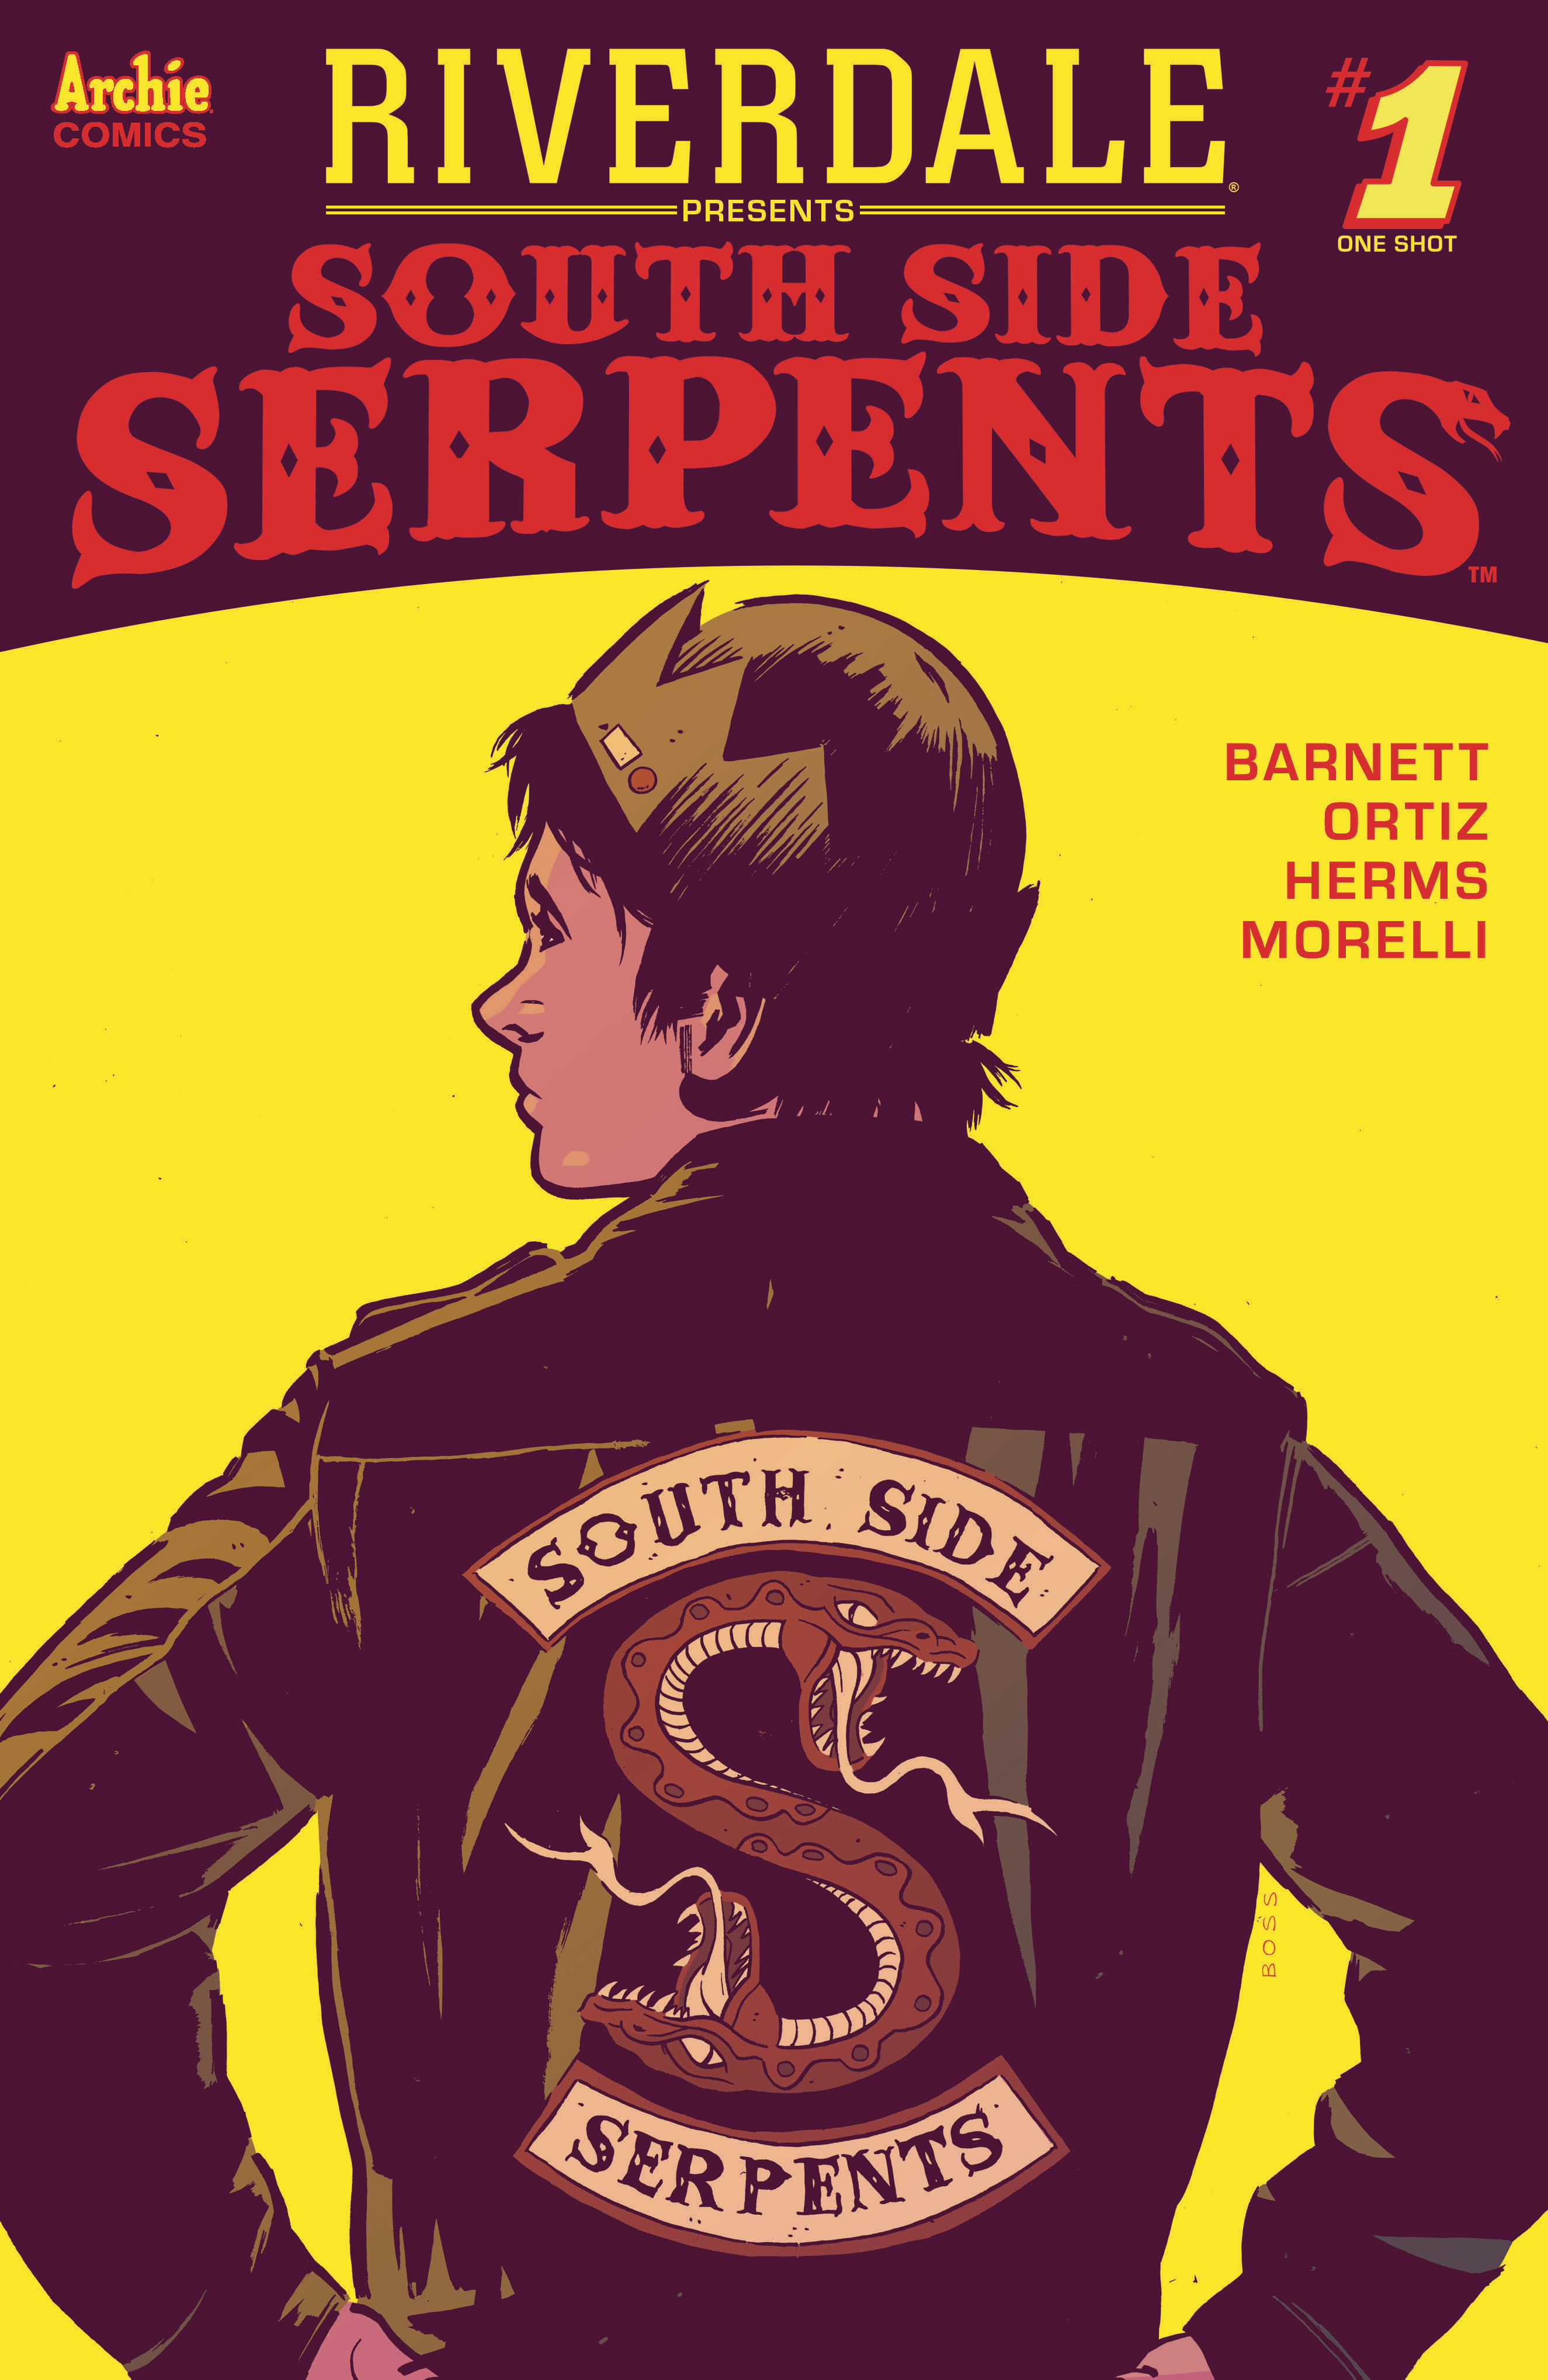 Riverdale Presents South Sideserpents One Shot Boss Cover